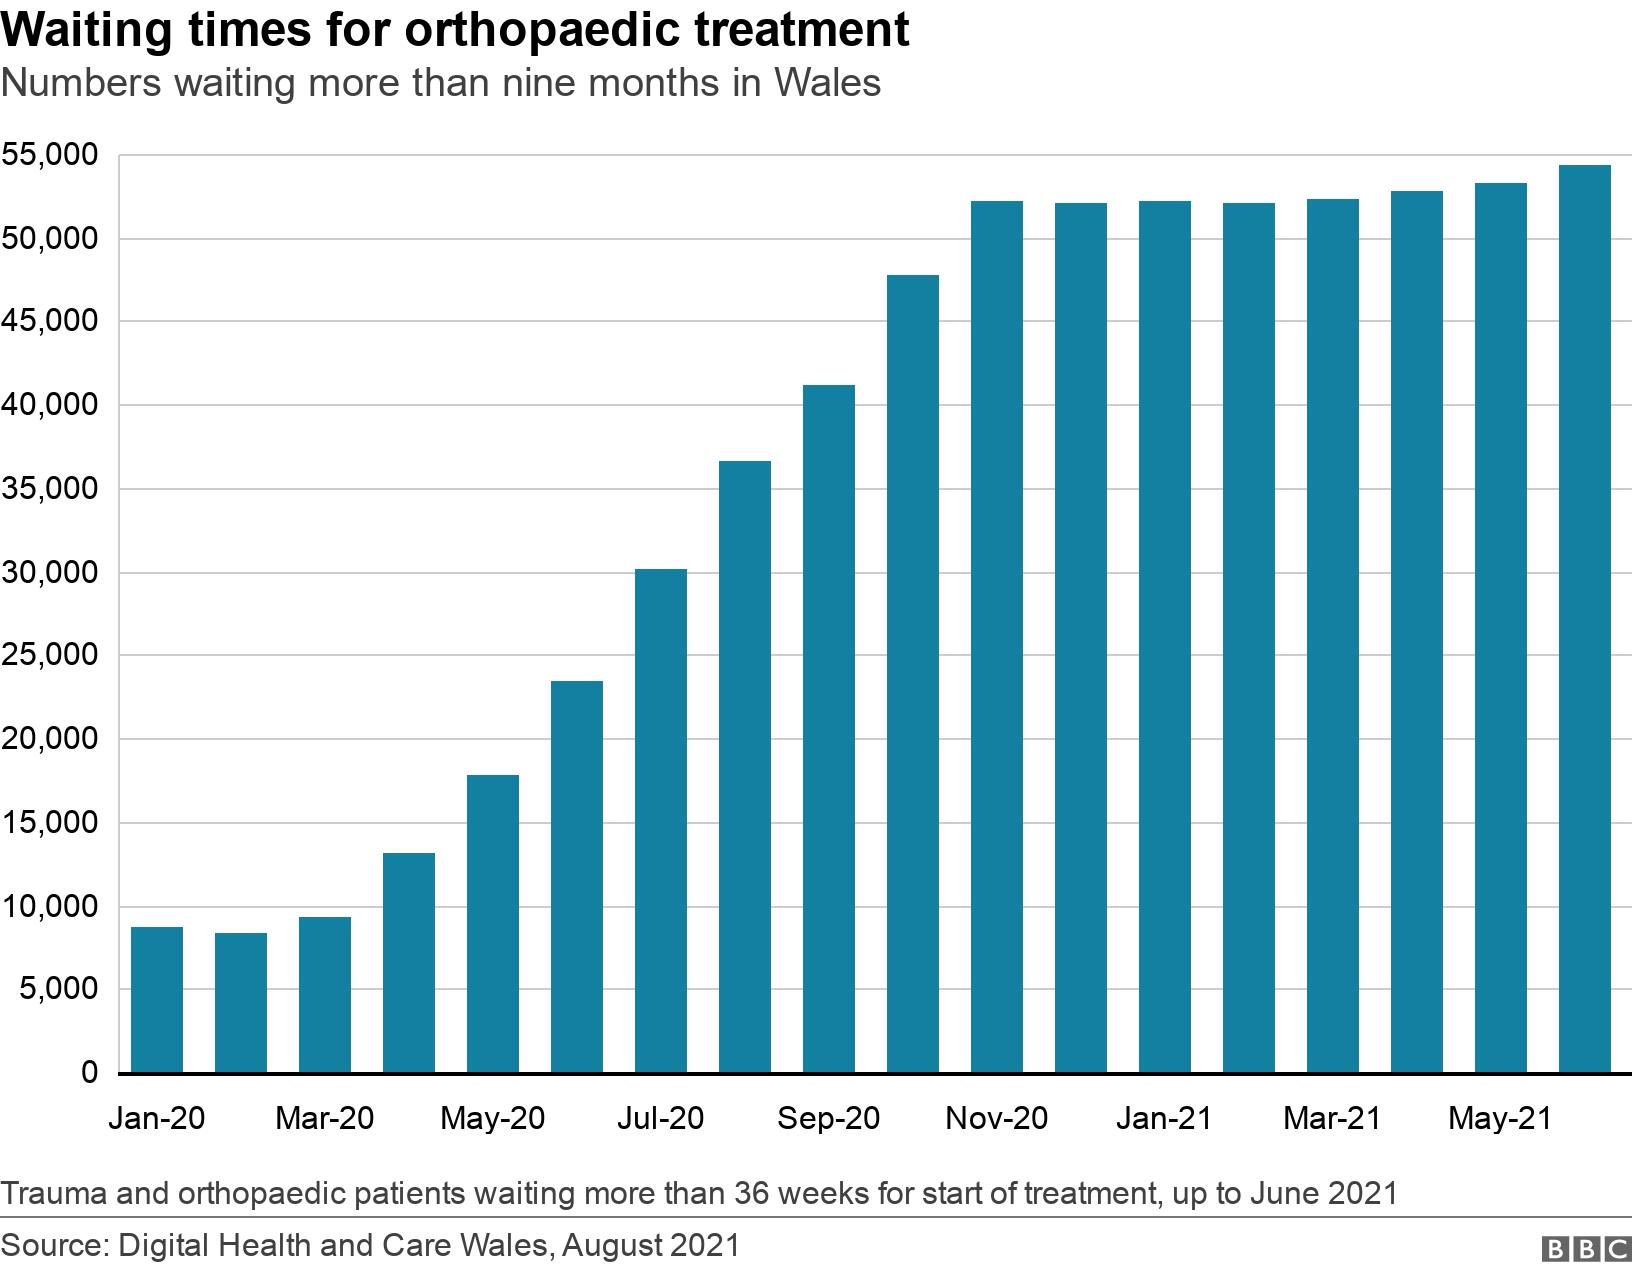 Waiting times for orthopaedic treatment. Numbers waiting more than nine months in Wales.  Trauma and orthopaedic patients waiting more than 36 weeks for start of treatment, up to June 2021.